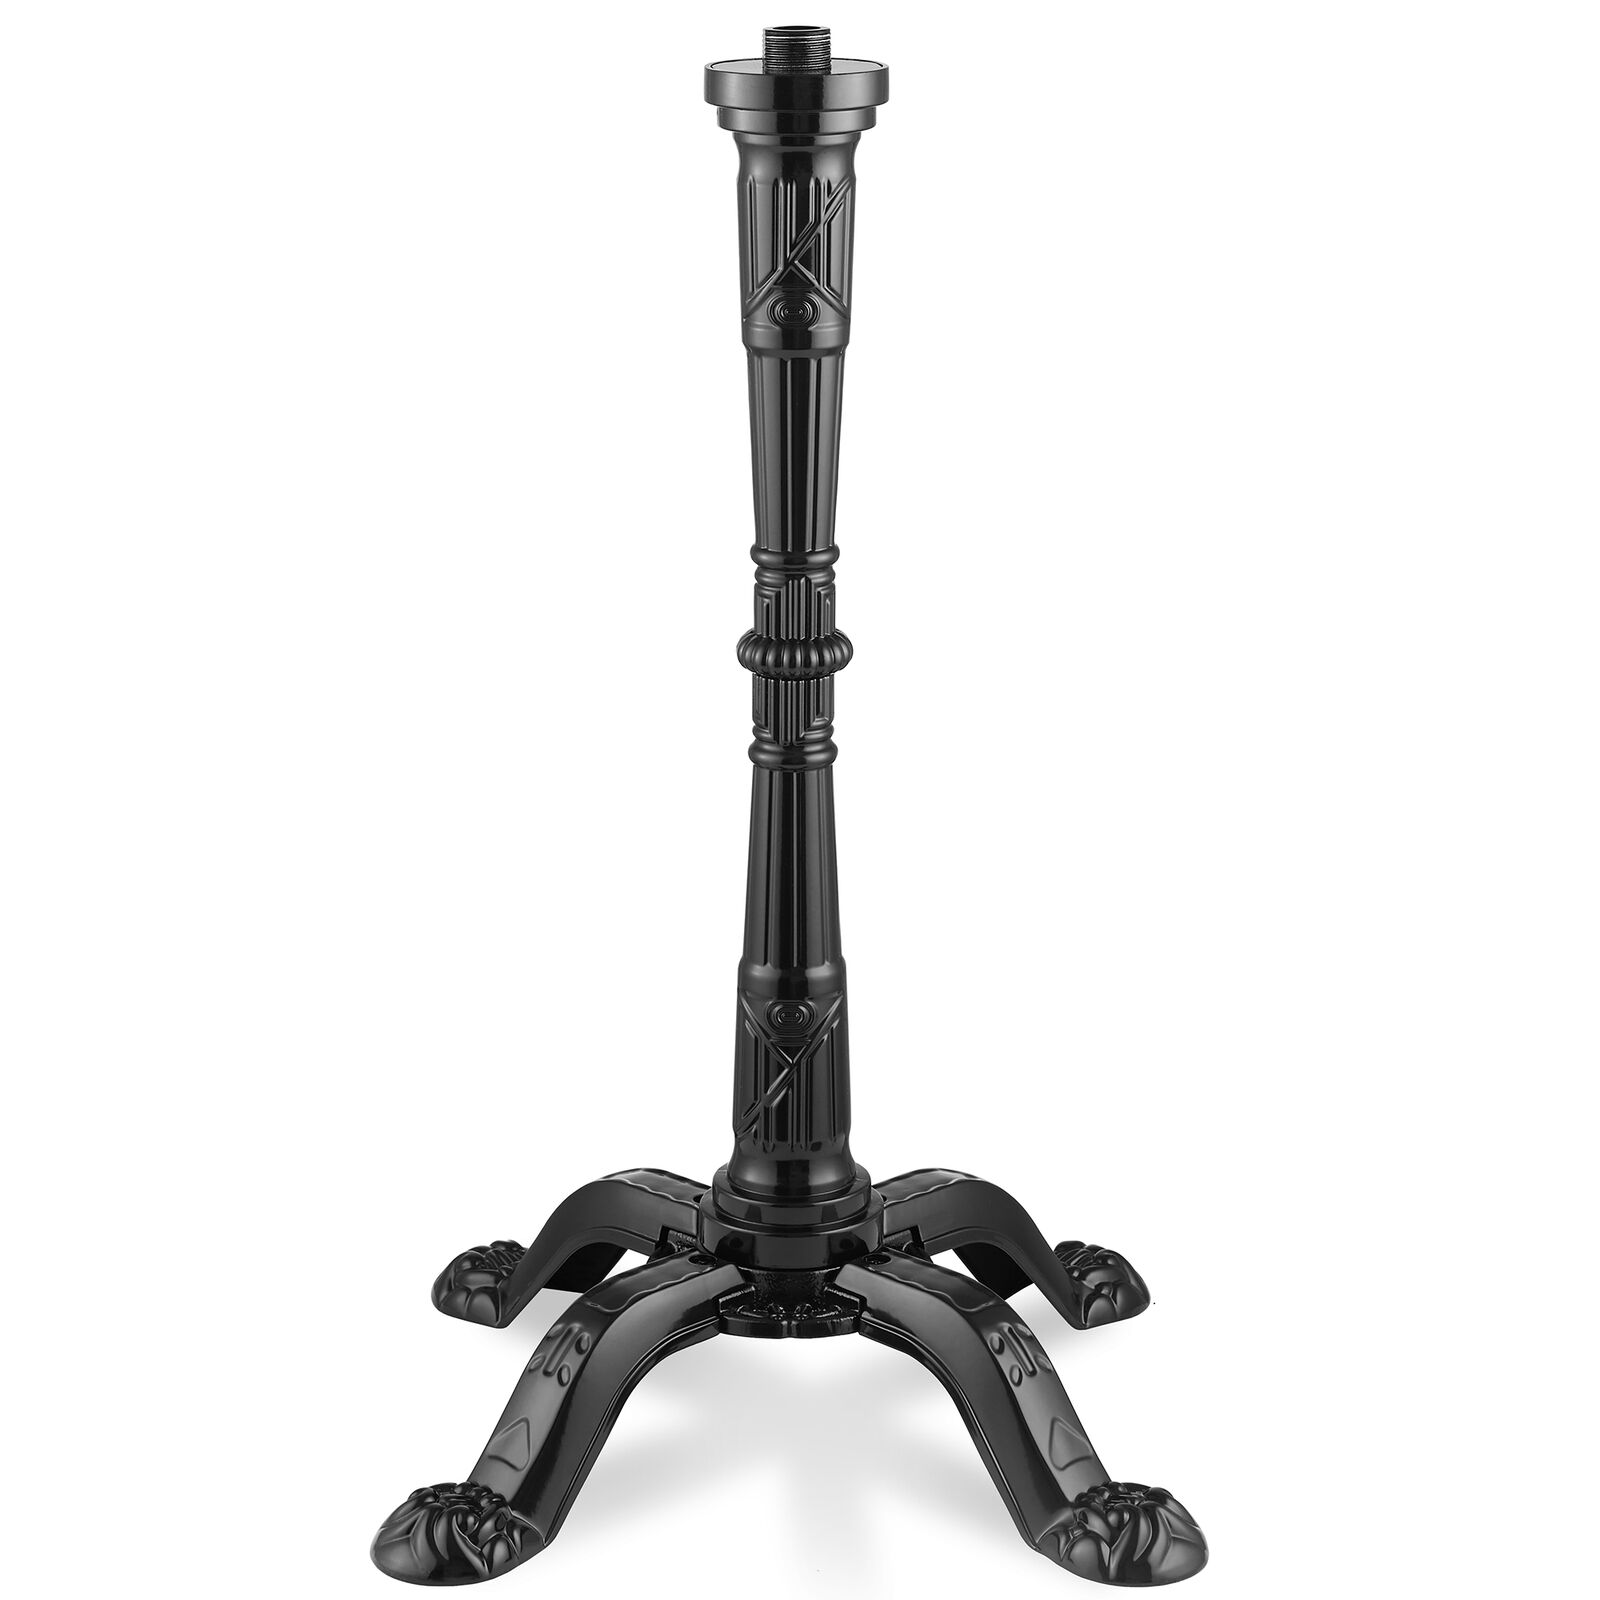 Gumball Machine Stand in Black for 15